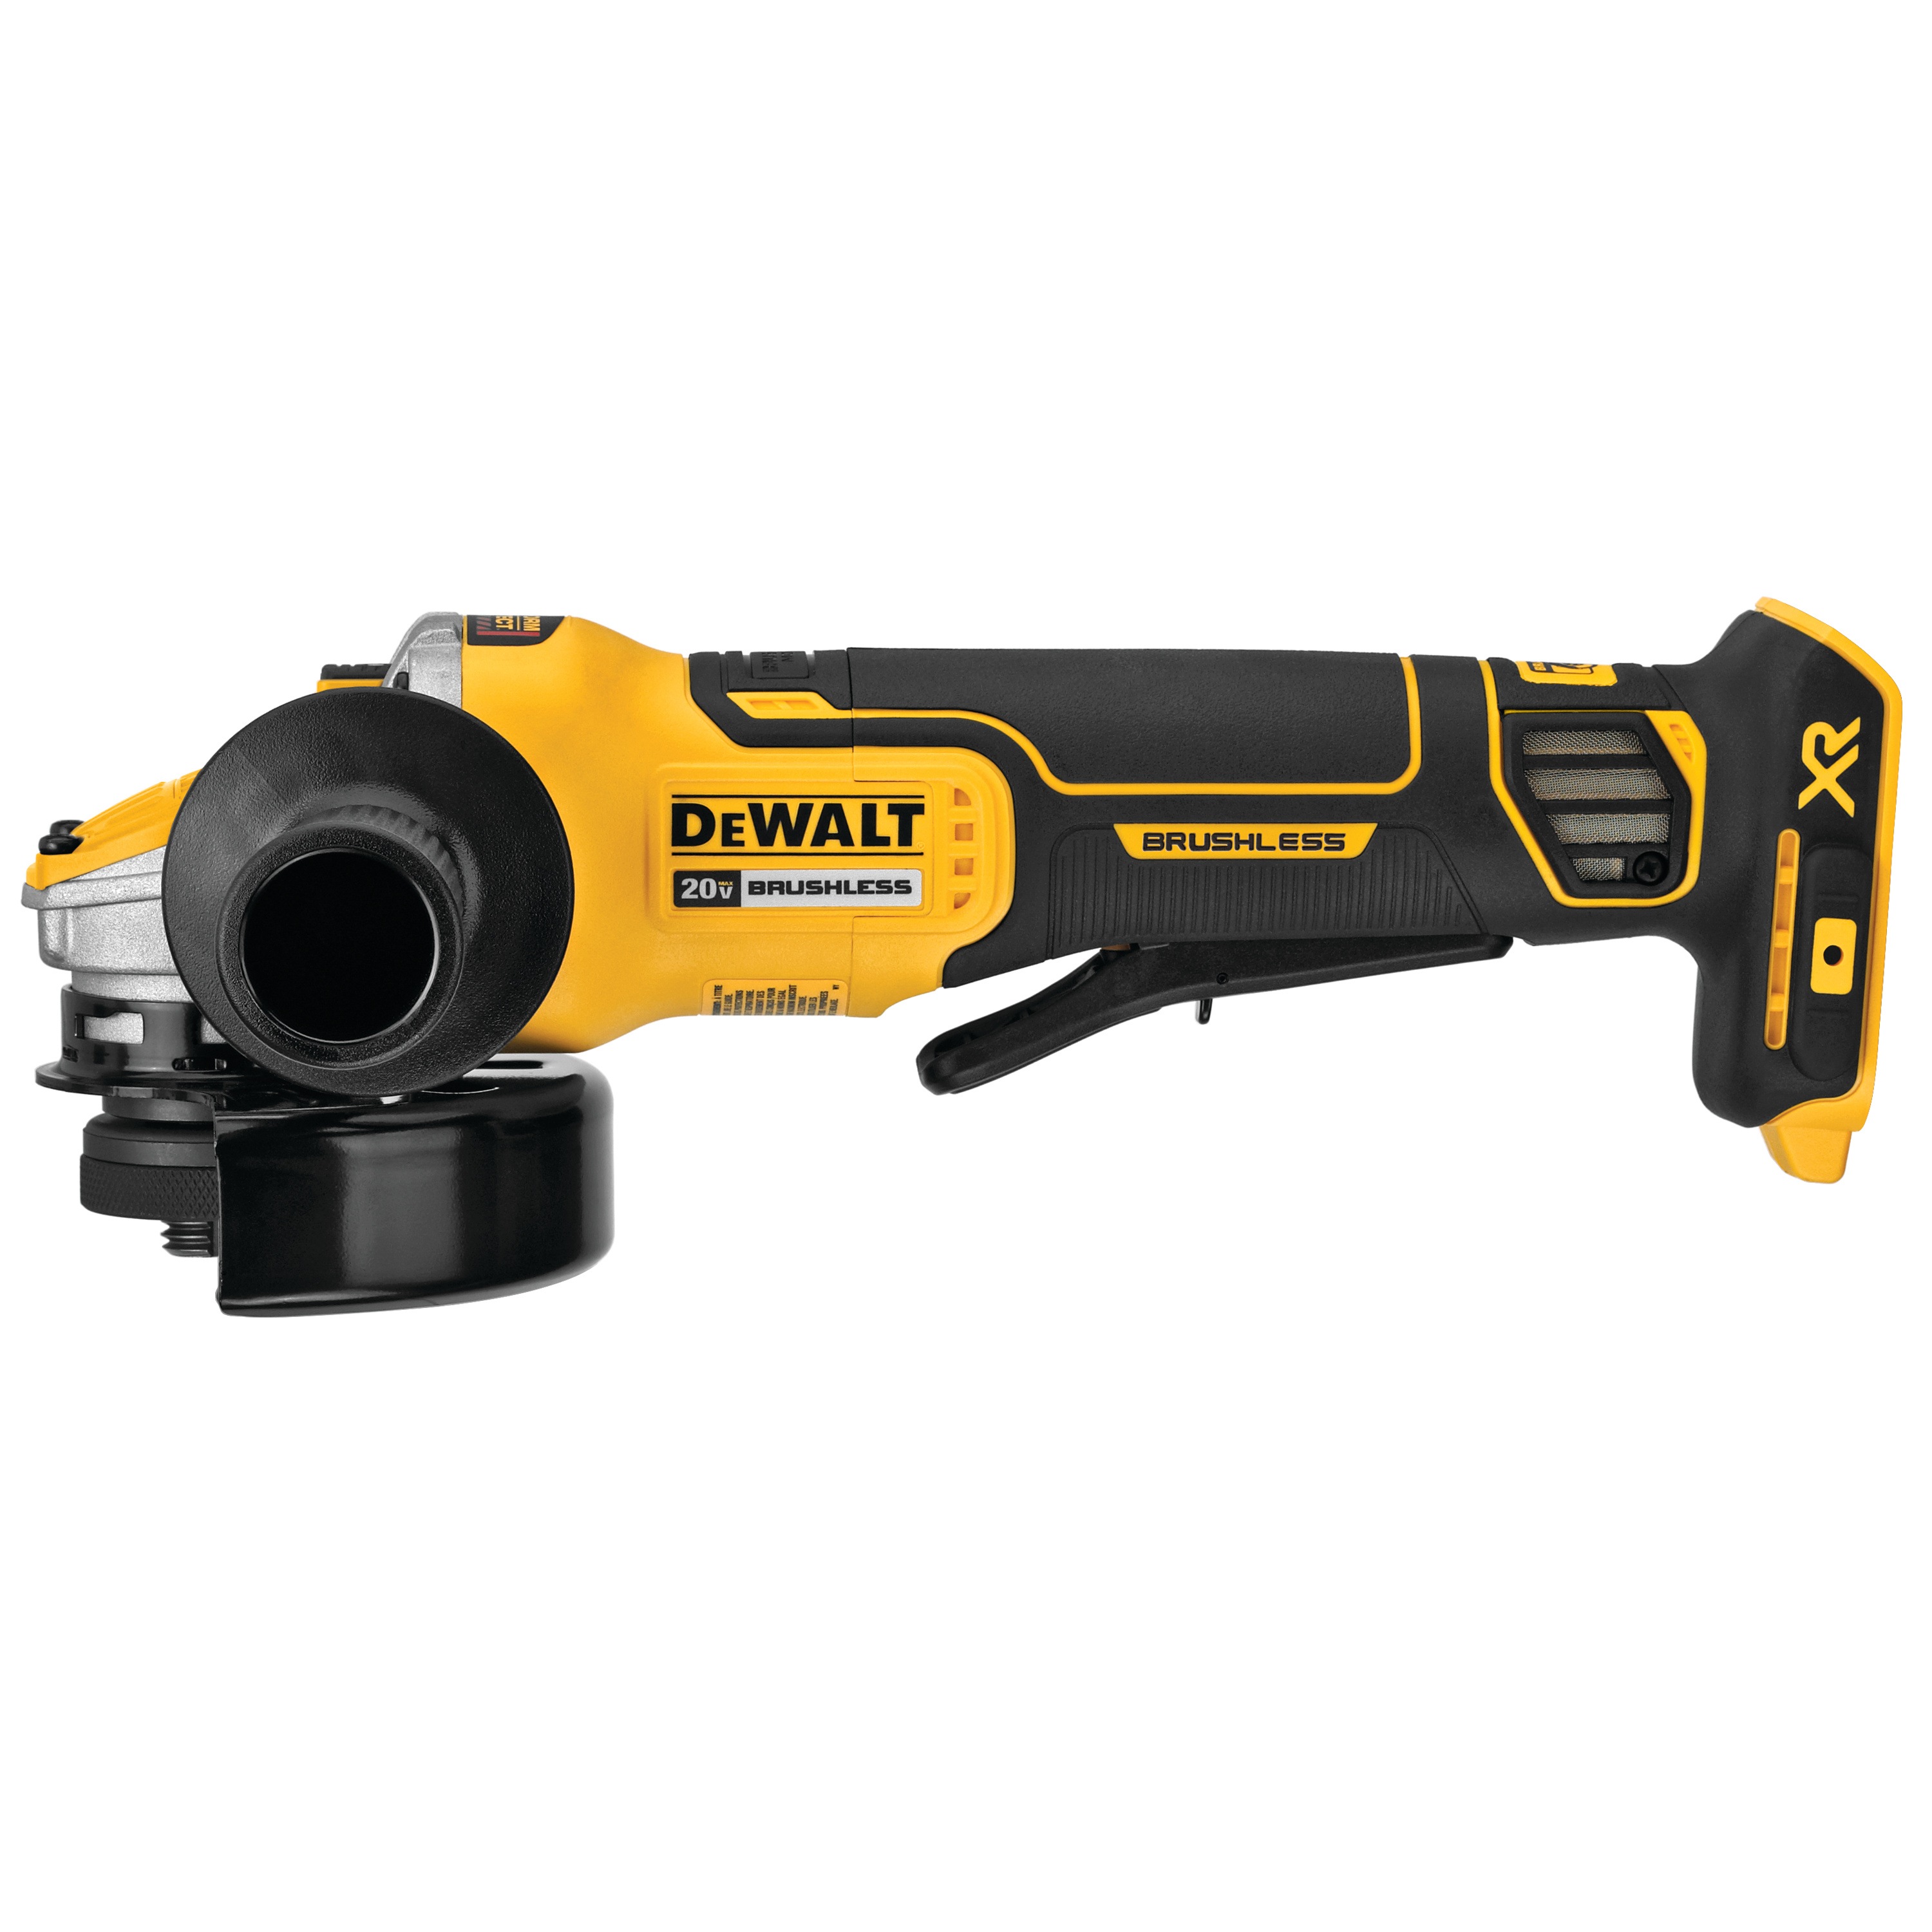 DEWALT - 20V MAX XR 412  5 in Brushless Cordless Small Angle Grinder with Power Detect Tool Technology Tool Only - DCG415B